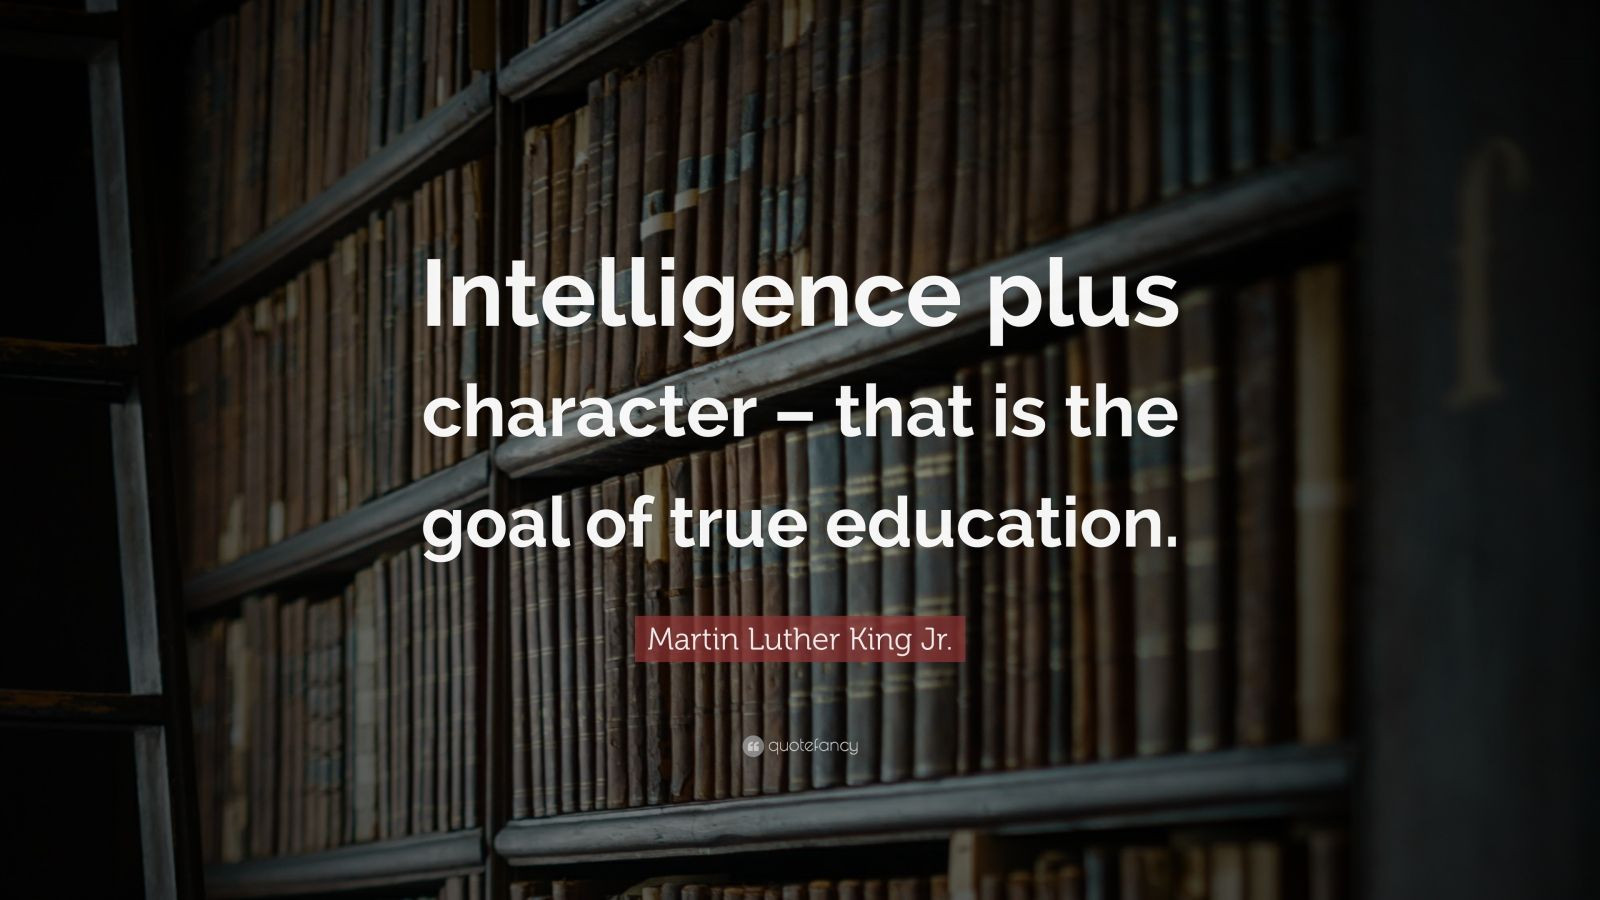 Martin Luther King Education Quote
 Martin Luther King Jr Quote “Intelligence plus character